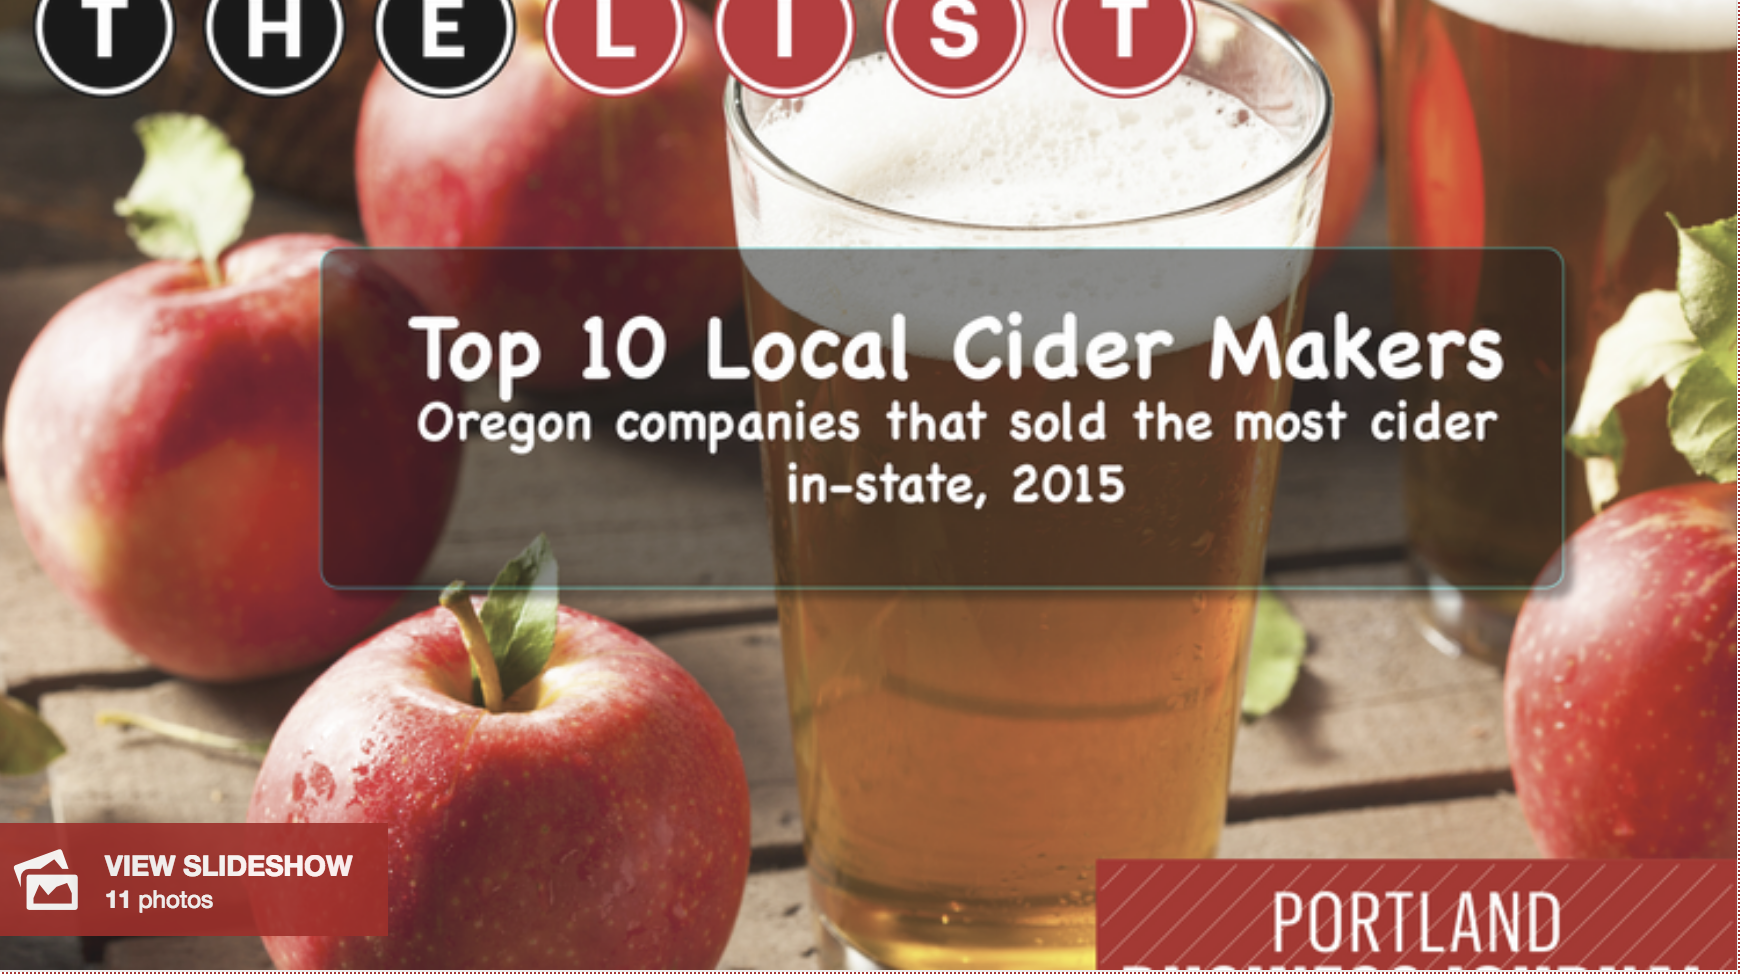 The list top 10 local cider makers in oregon.